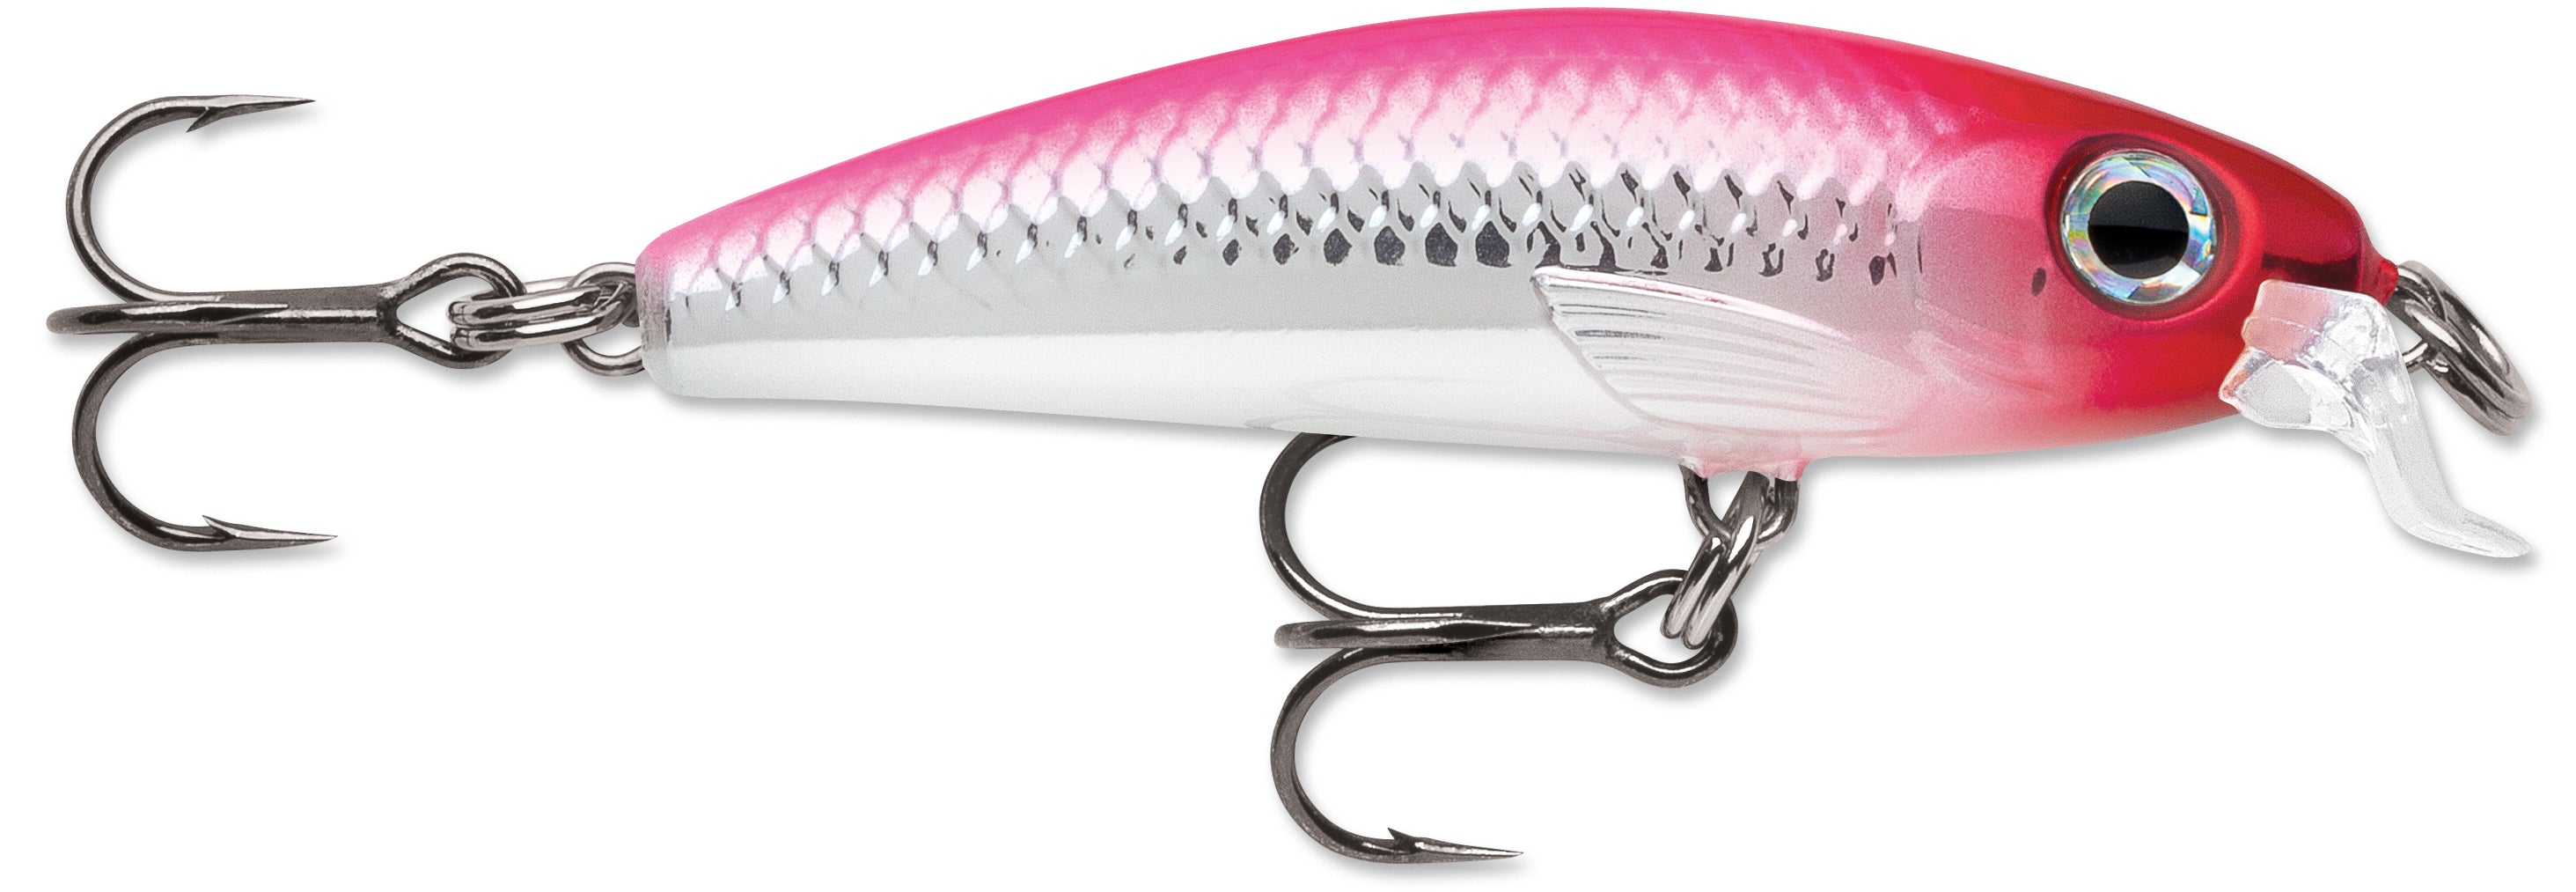 Rapala Ultra Light Minnow 06 Trout Jagged Tooth Tackle